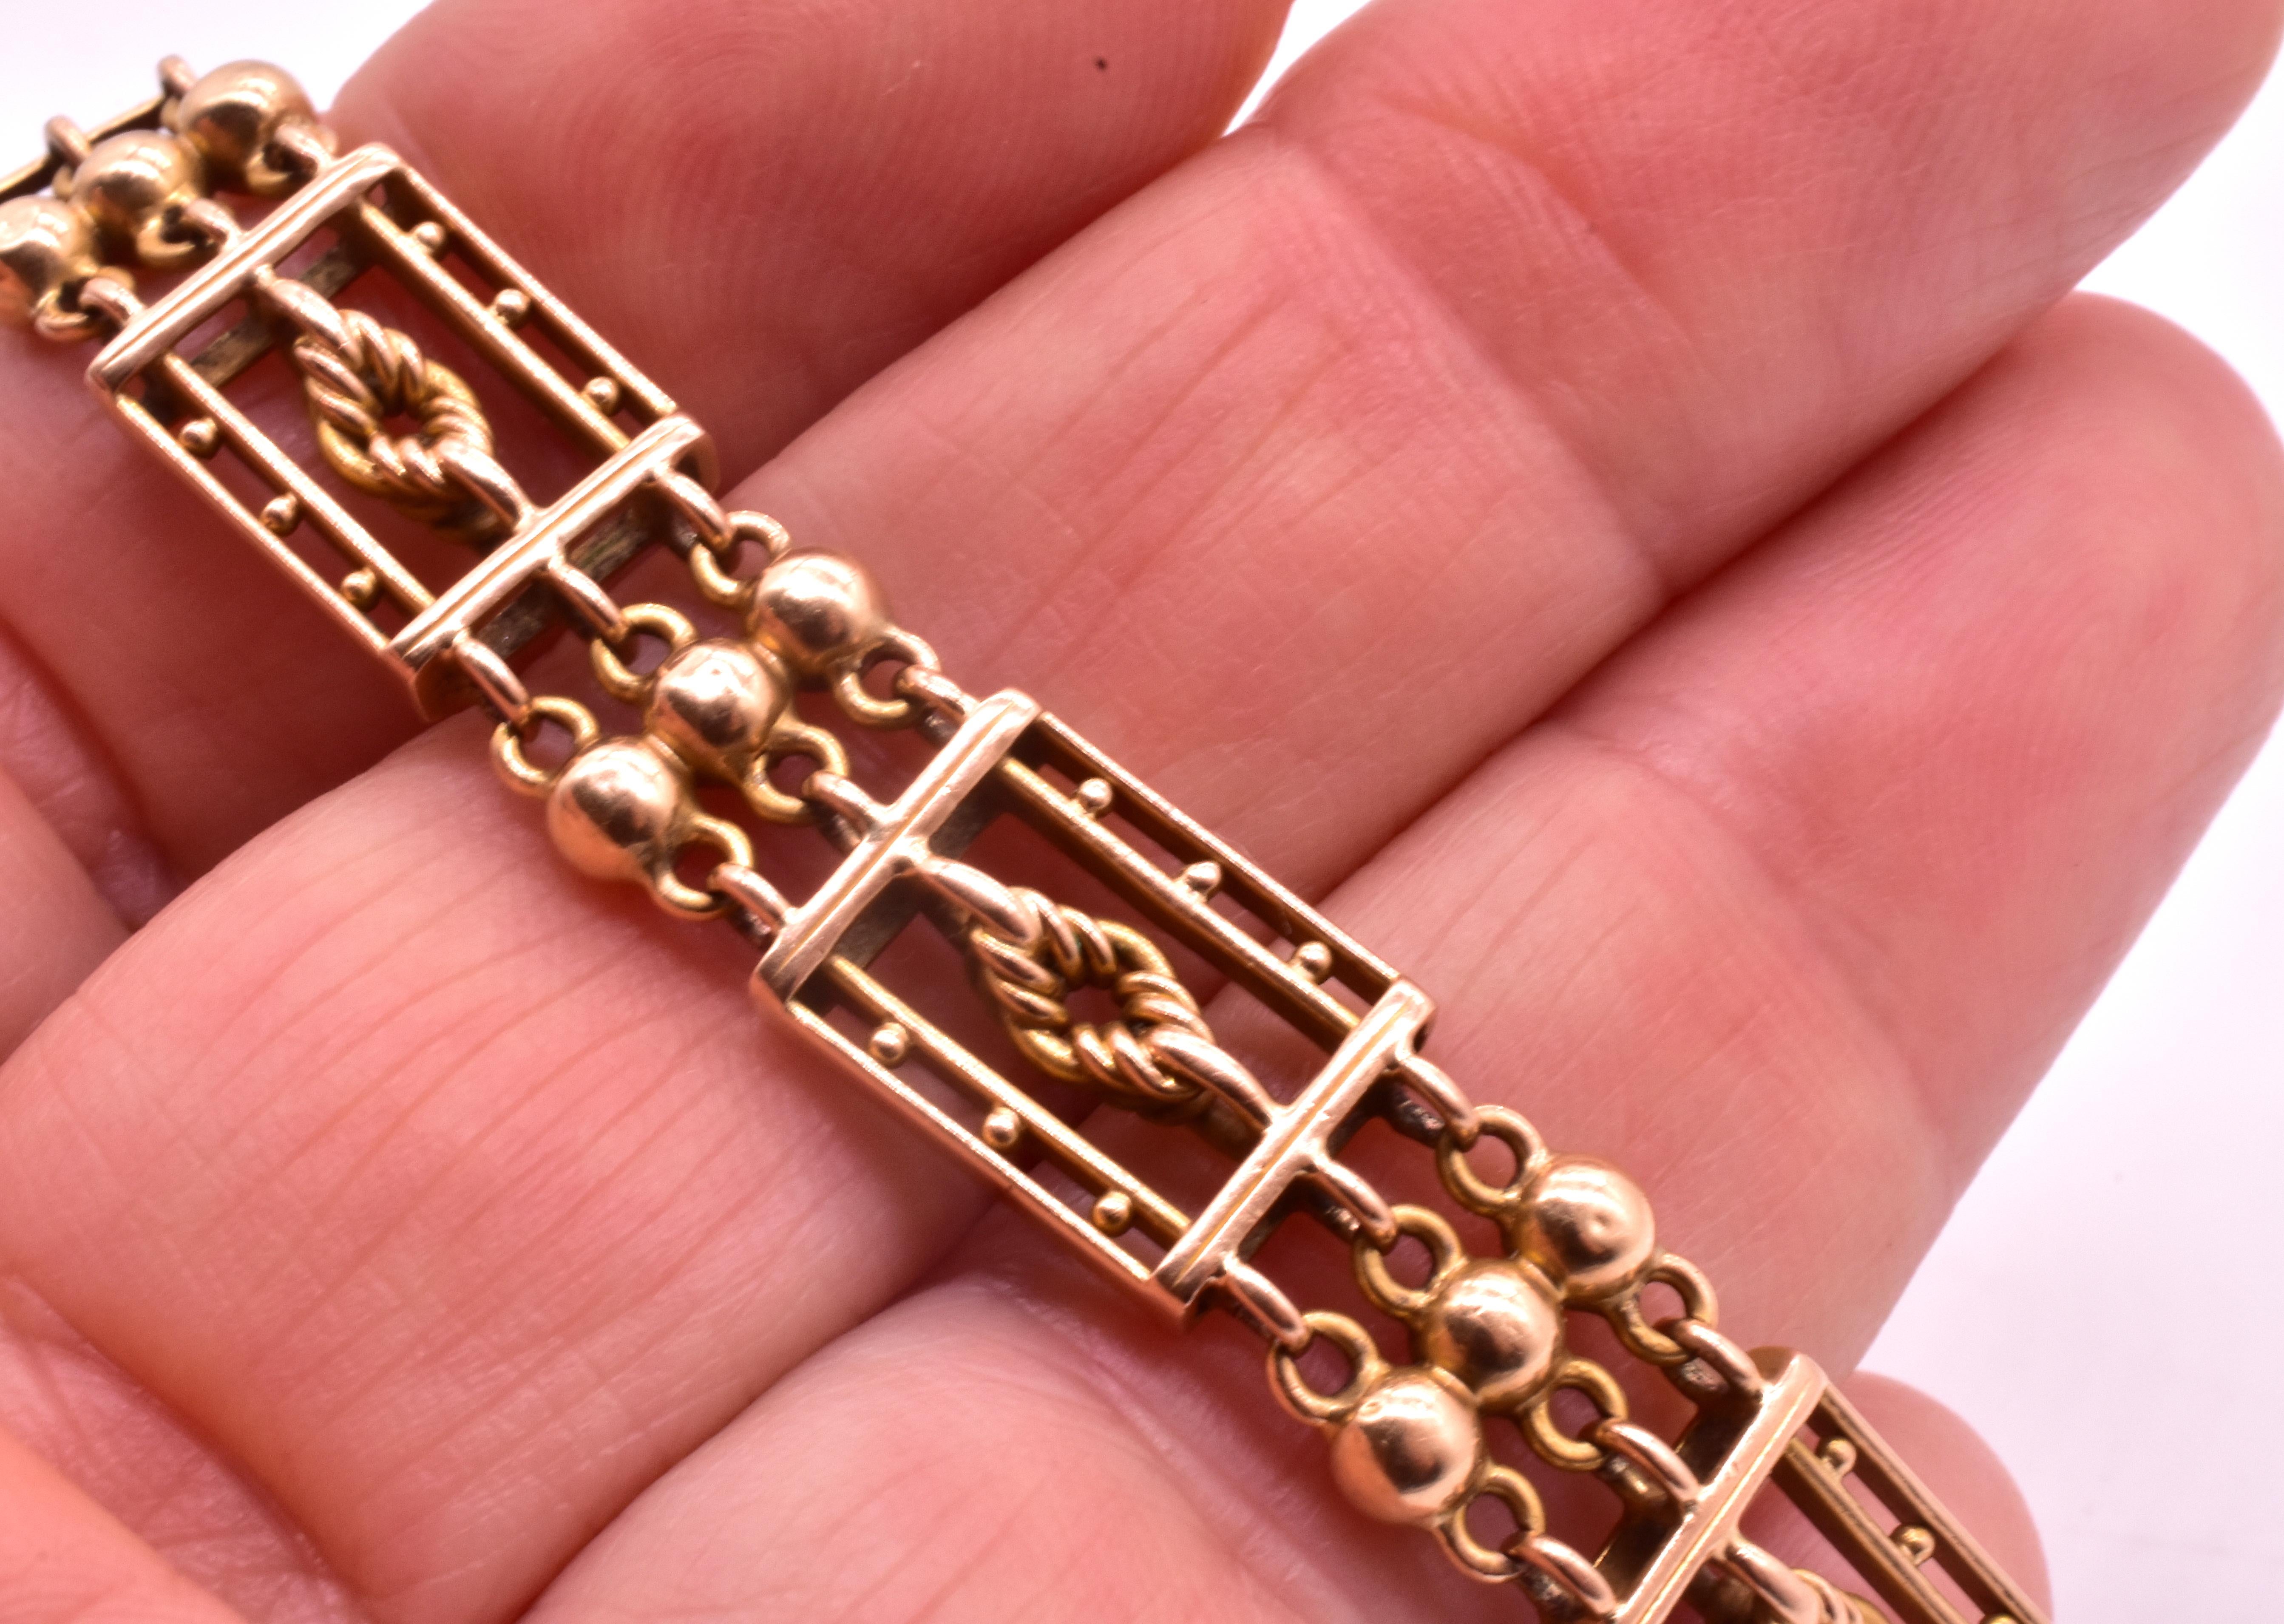 Charming circa 1930 15K geometric gold bracelet with lover's knot links inside rectangles bordered with gold balls as one set of links, and a triplicate of gold balls comprising the next link. The pattern continues all around. This casual, classic